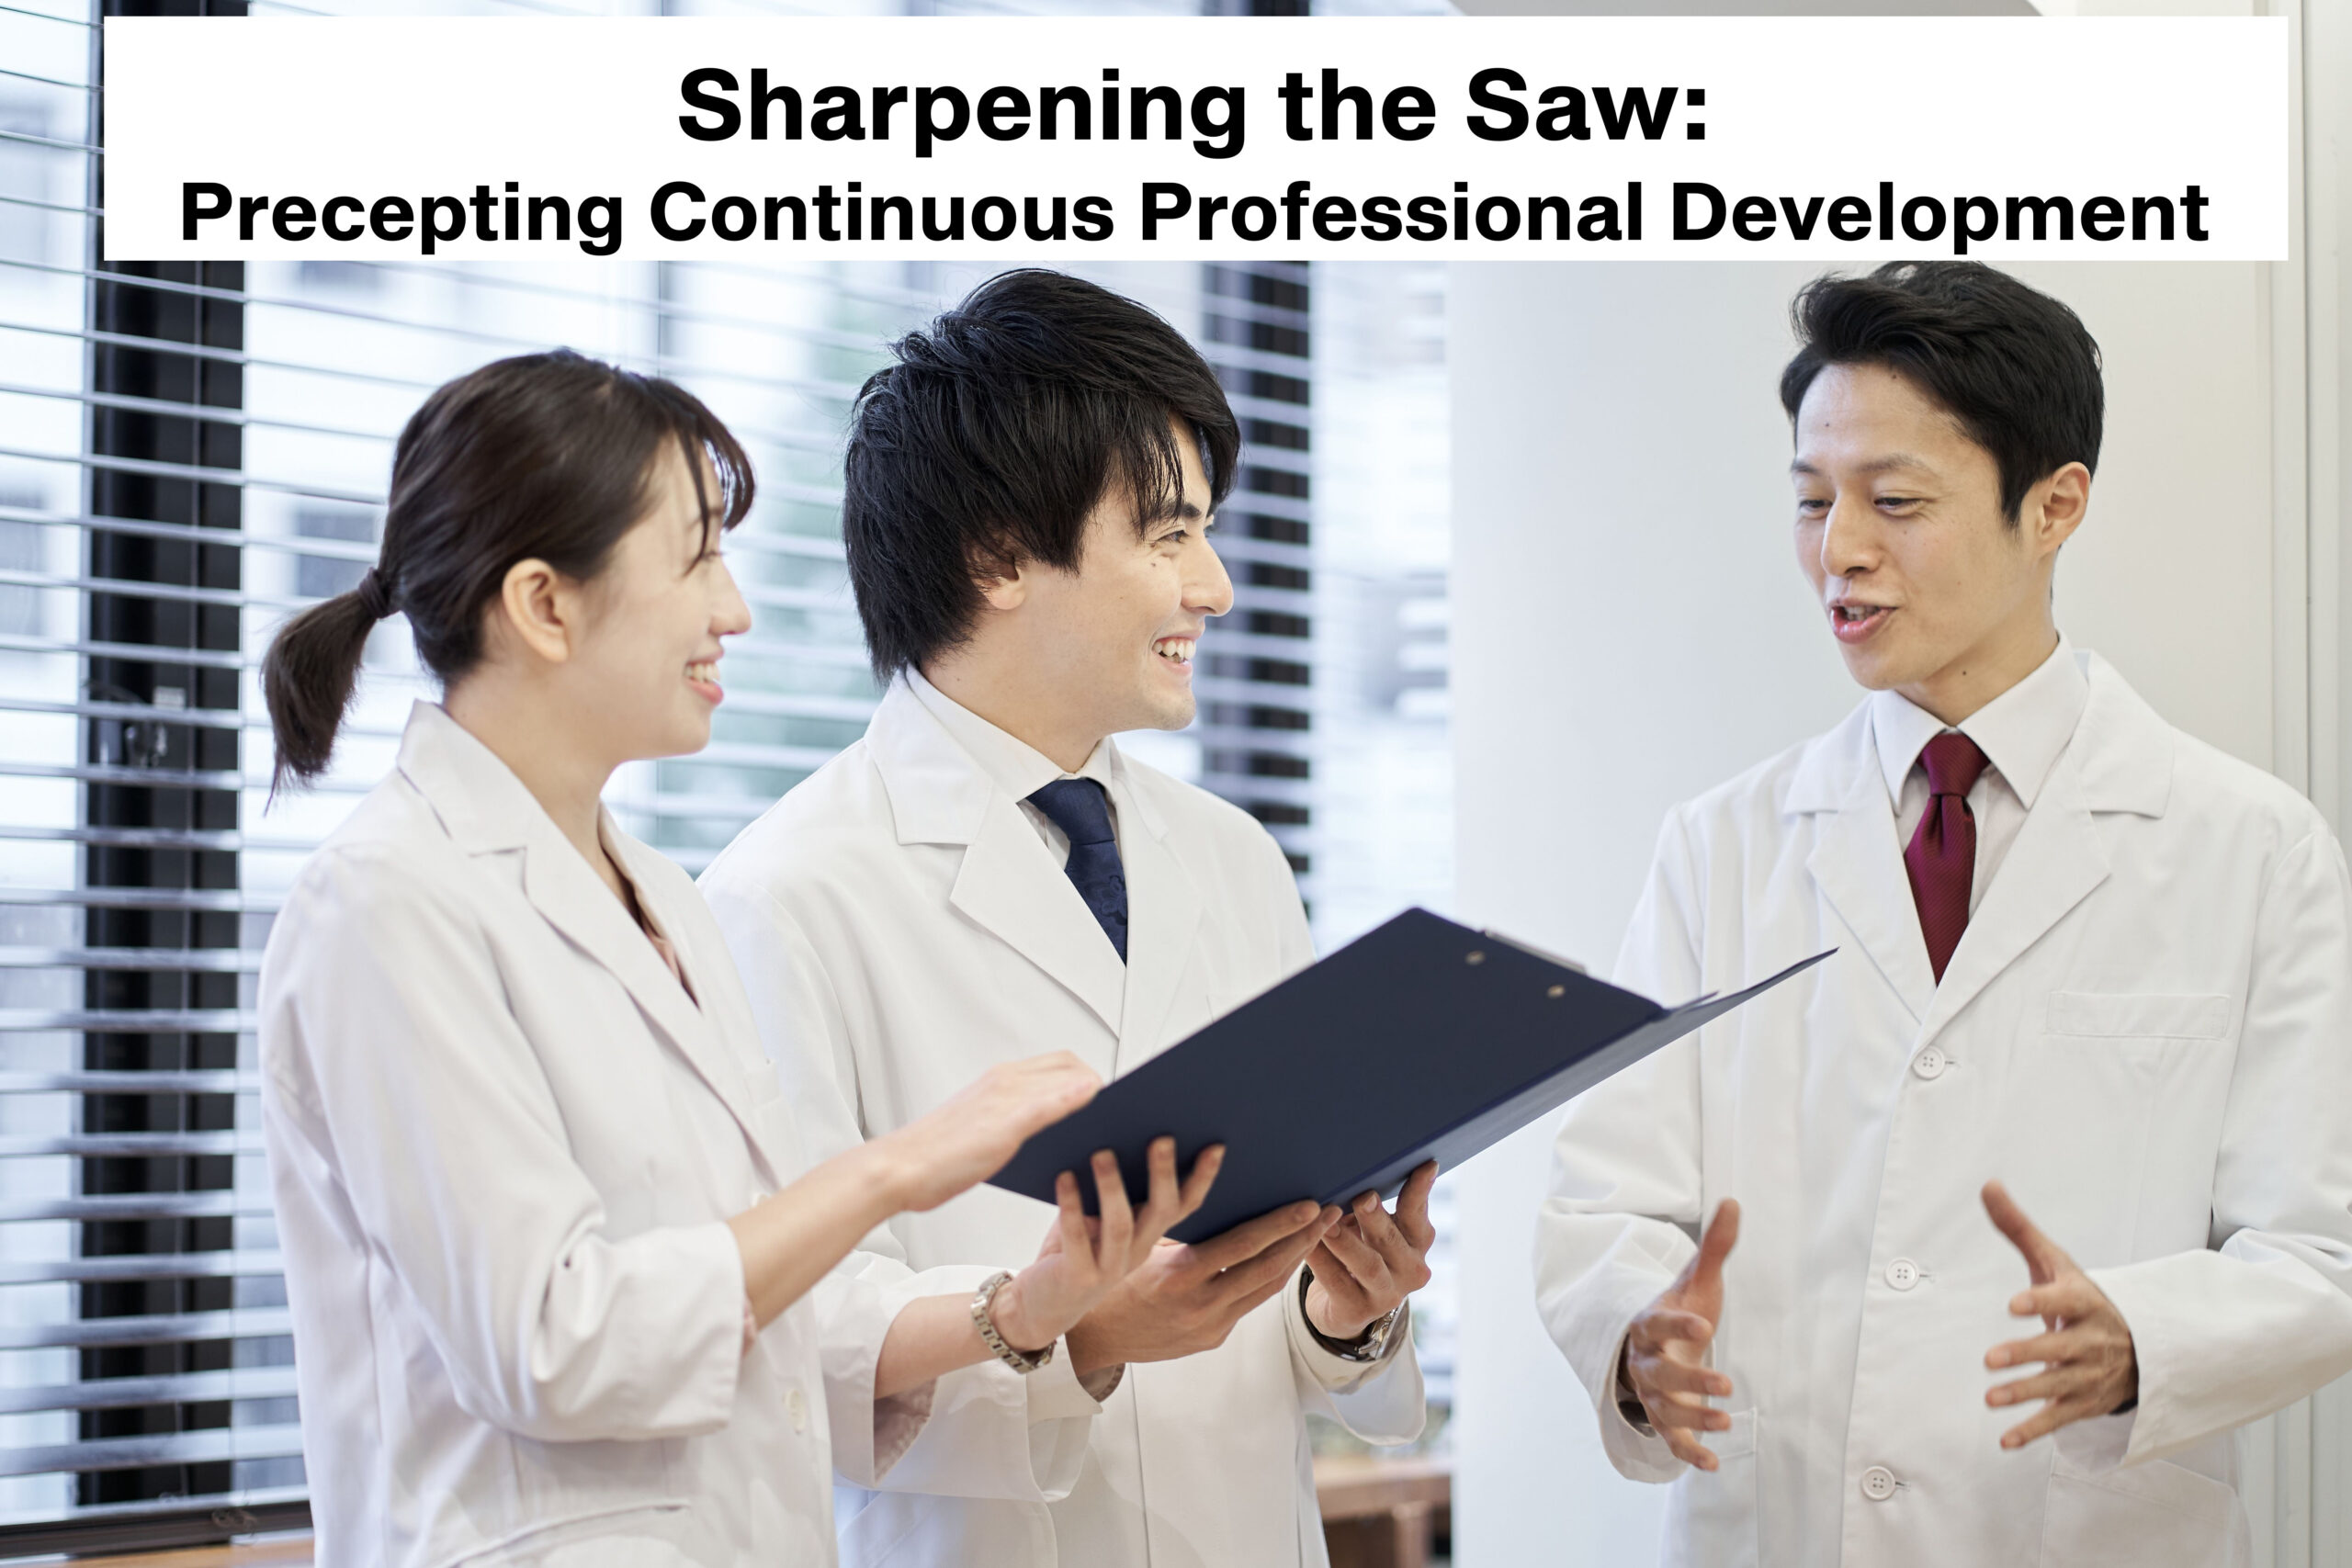 Sharpening Th Saw Cover Photo Shutterstock 2074367422 1 Scaled